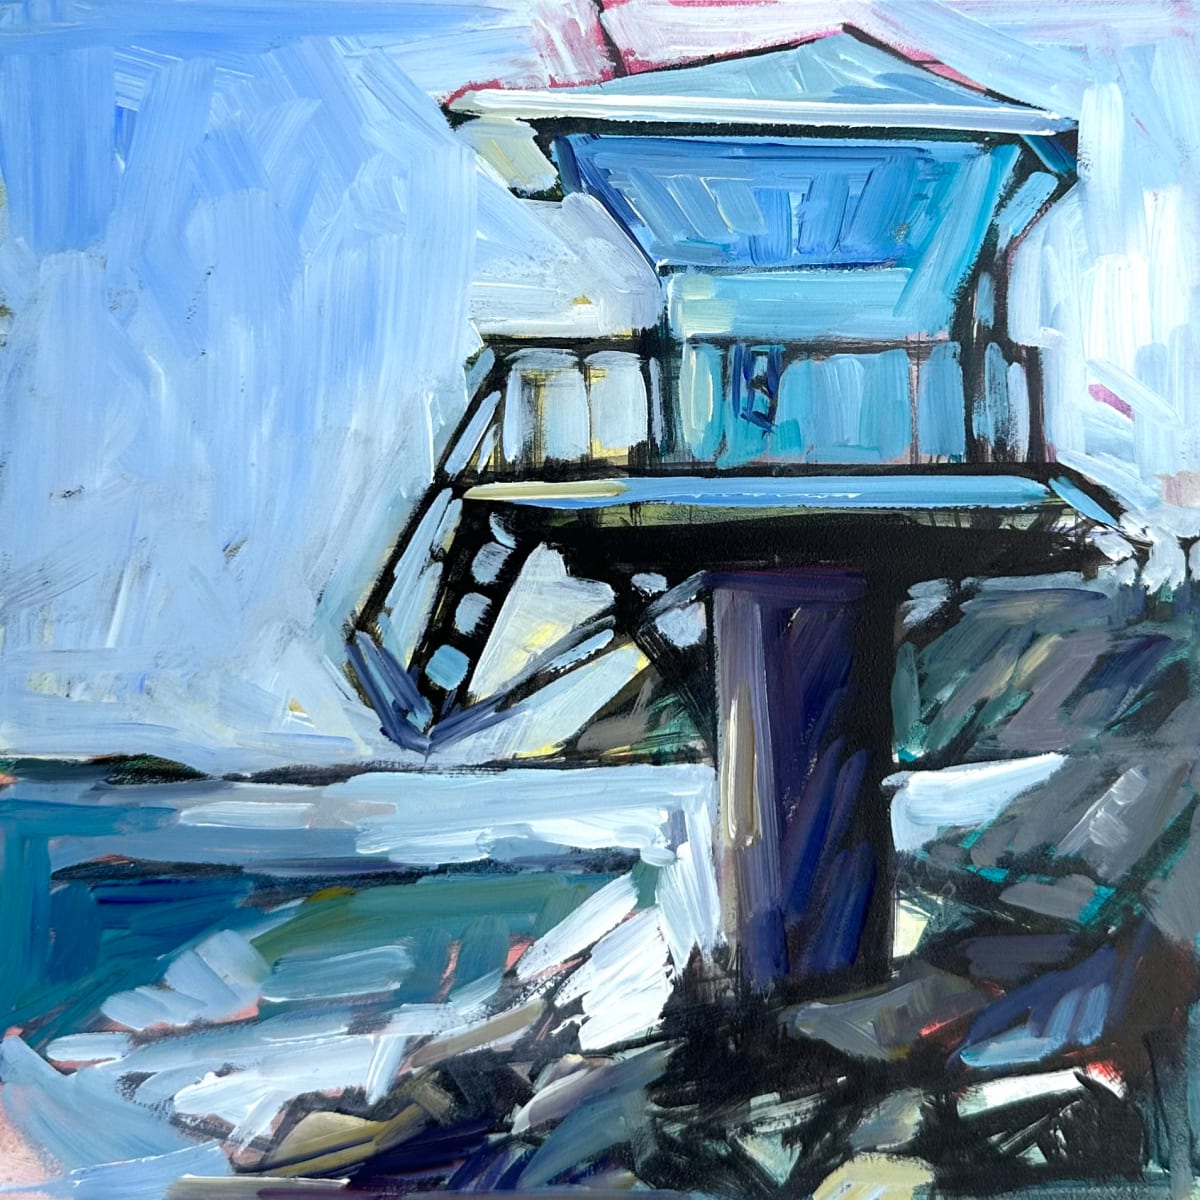 Tower 18 II by Andrea Nova  Image: The creative process often leads to delightful surprises, like this expressive painting of Tower 19 in Cardiff by the Sea, CA. The use of ink and oil, along with the inadvertent transformation of the 9 into an 8, adds an extra layer of uniqueness to the piece. It's funny how those little quirks become part of a painting's story.